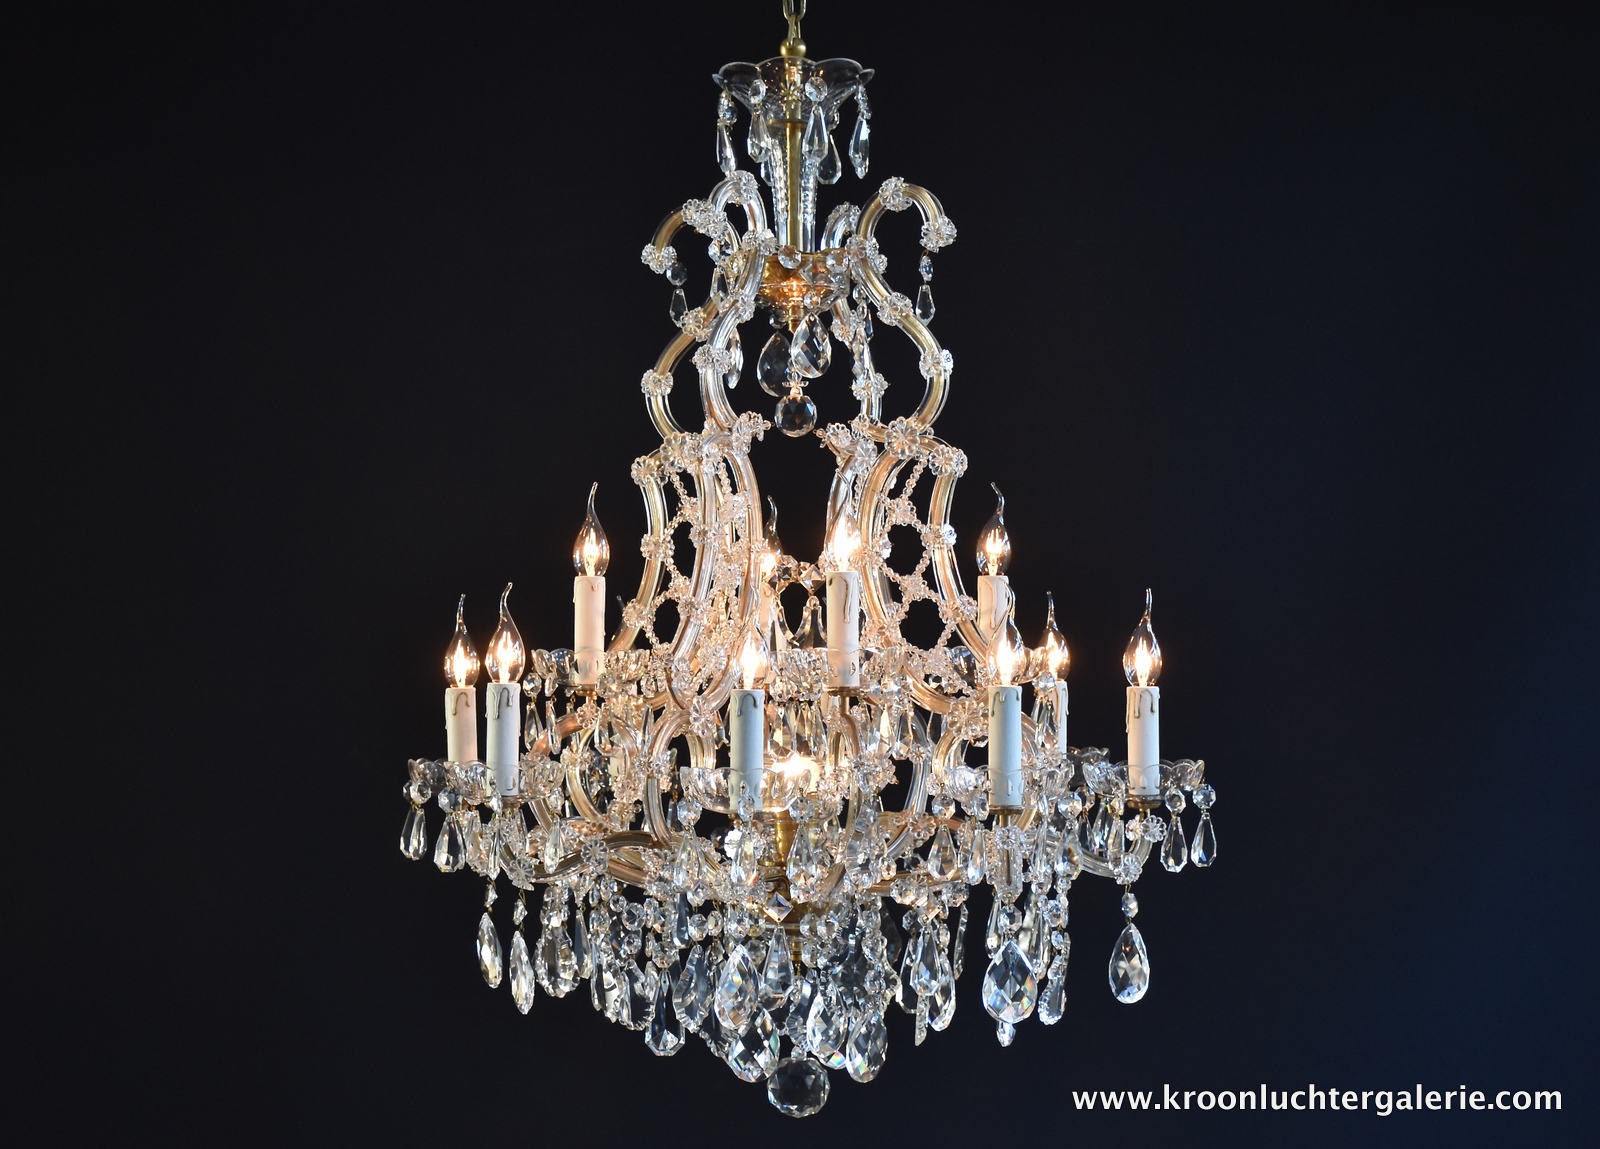 Large crystal chandelier with 13 light